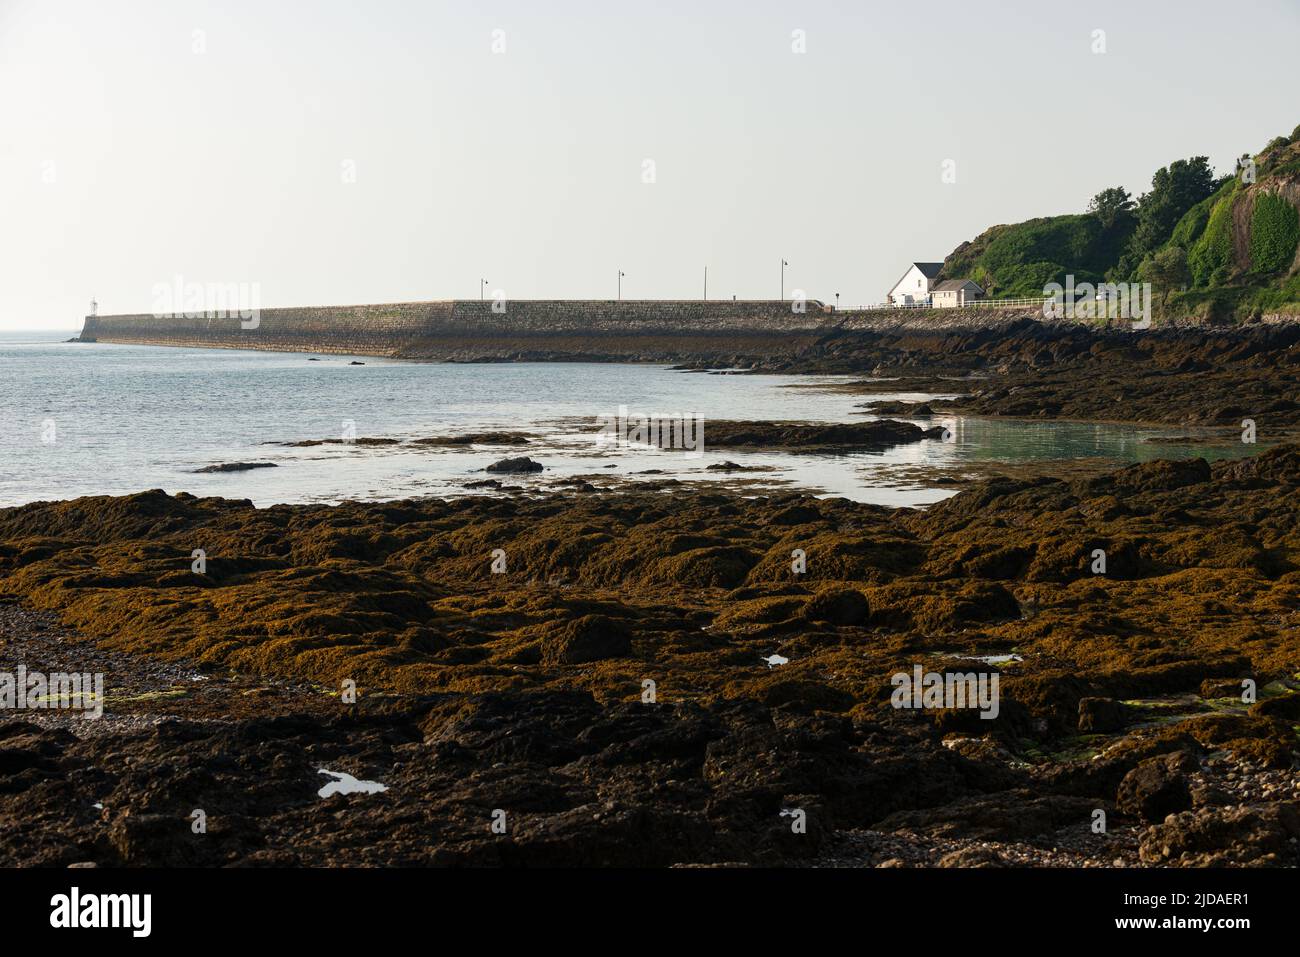 St Catherines breakwater viewed from Fliquet Bay Stock Photo